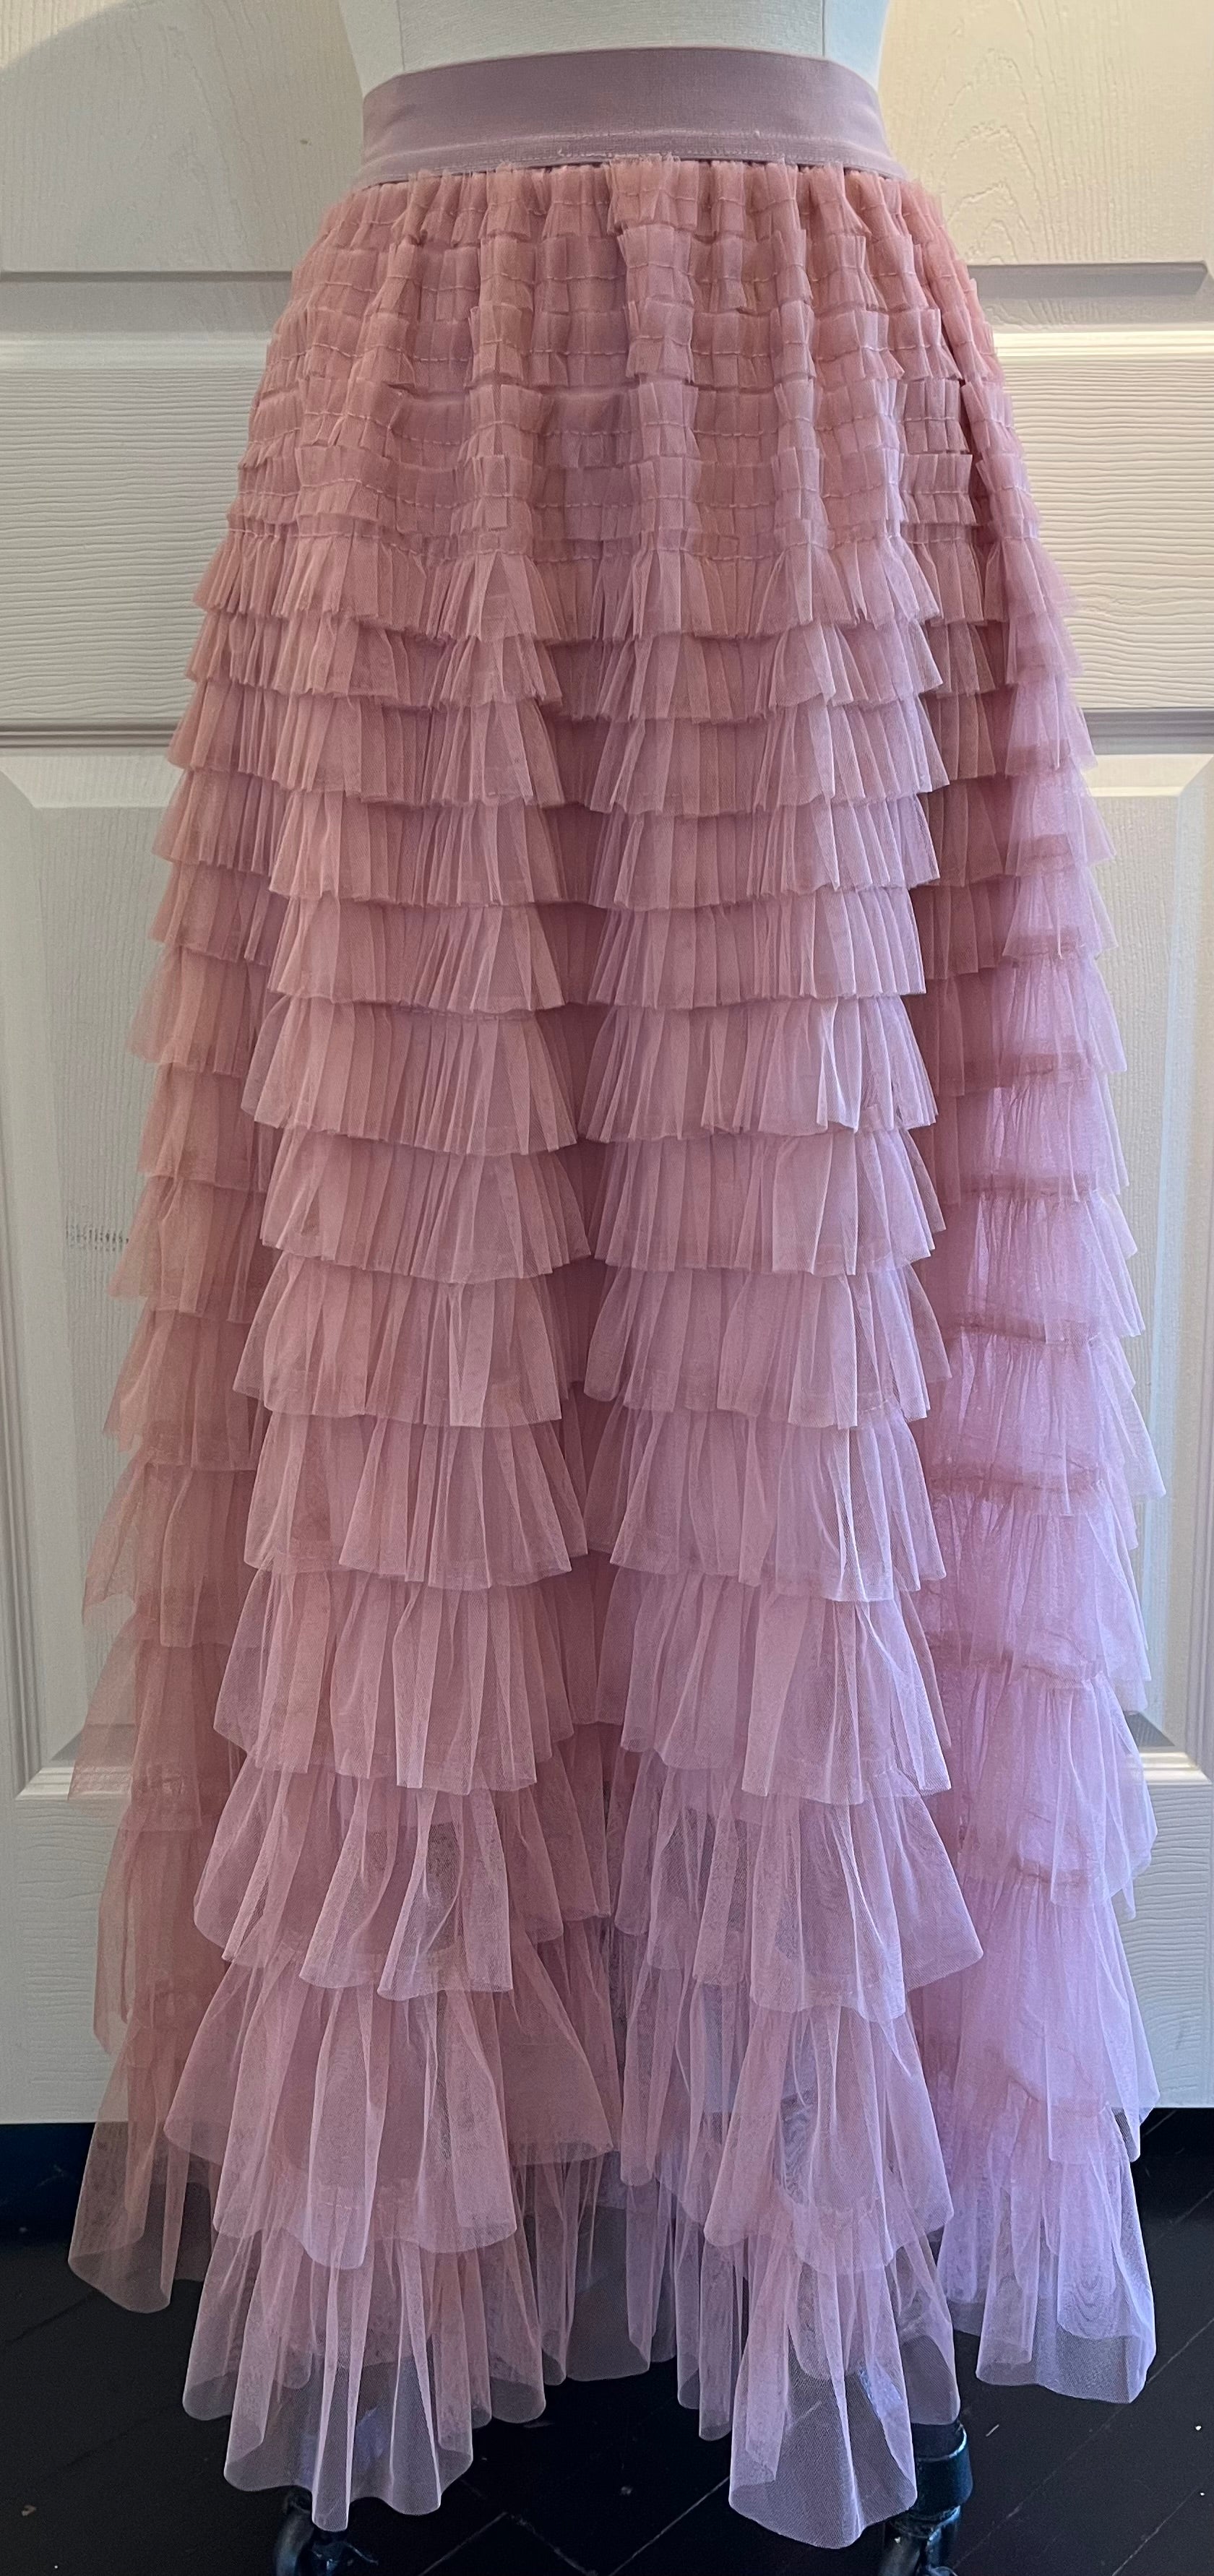 Light Mauve Tiered Ankle Length Tulle Skirt